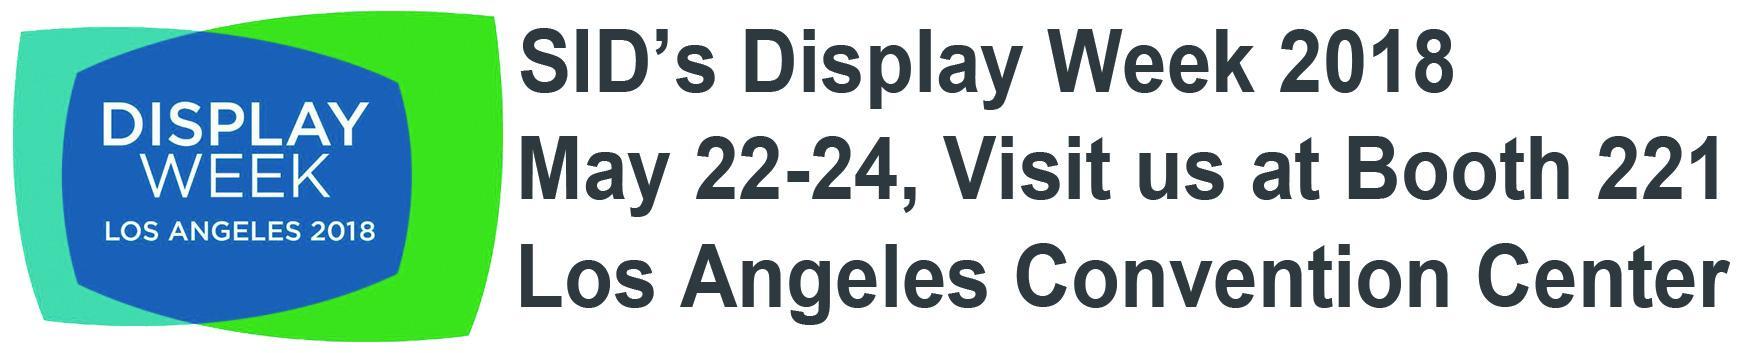 DLC Display will attend the SID2018 in Los Angeles